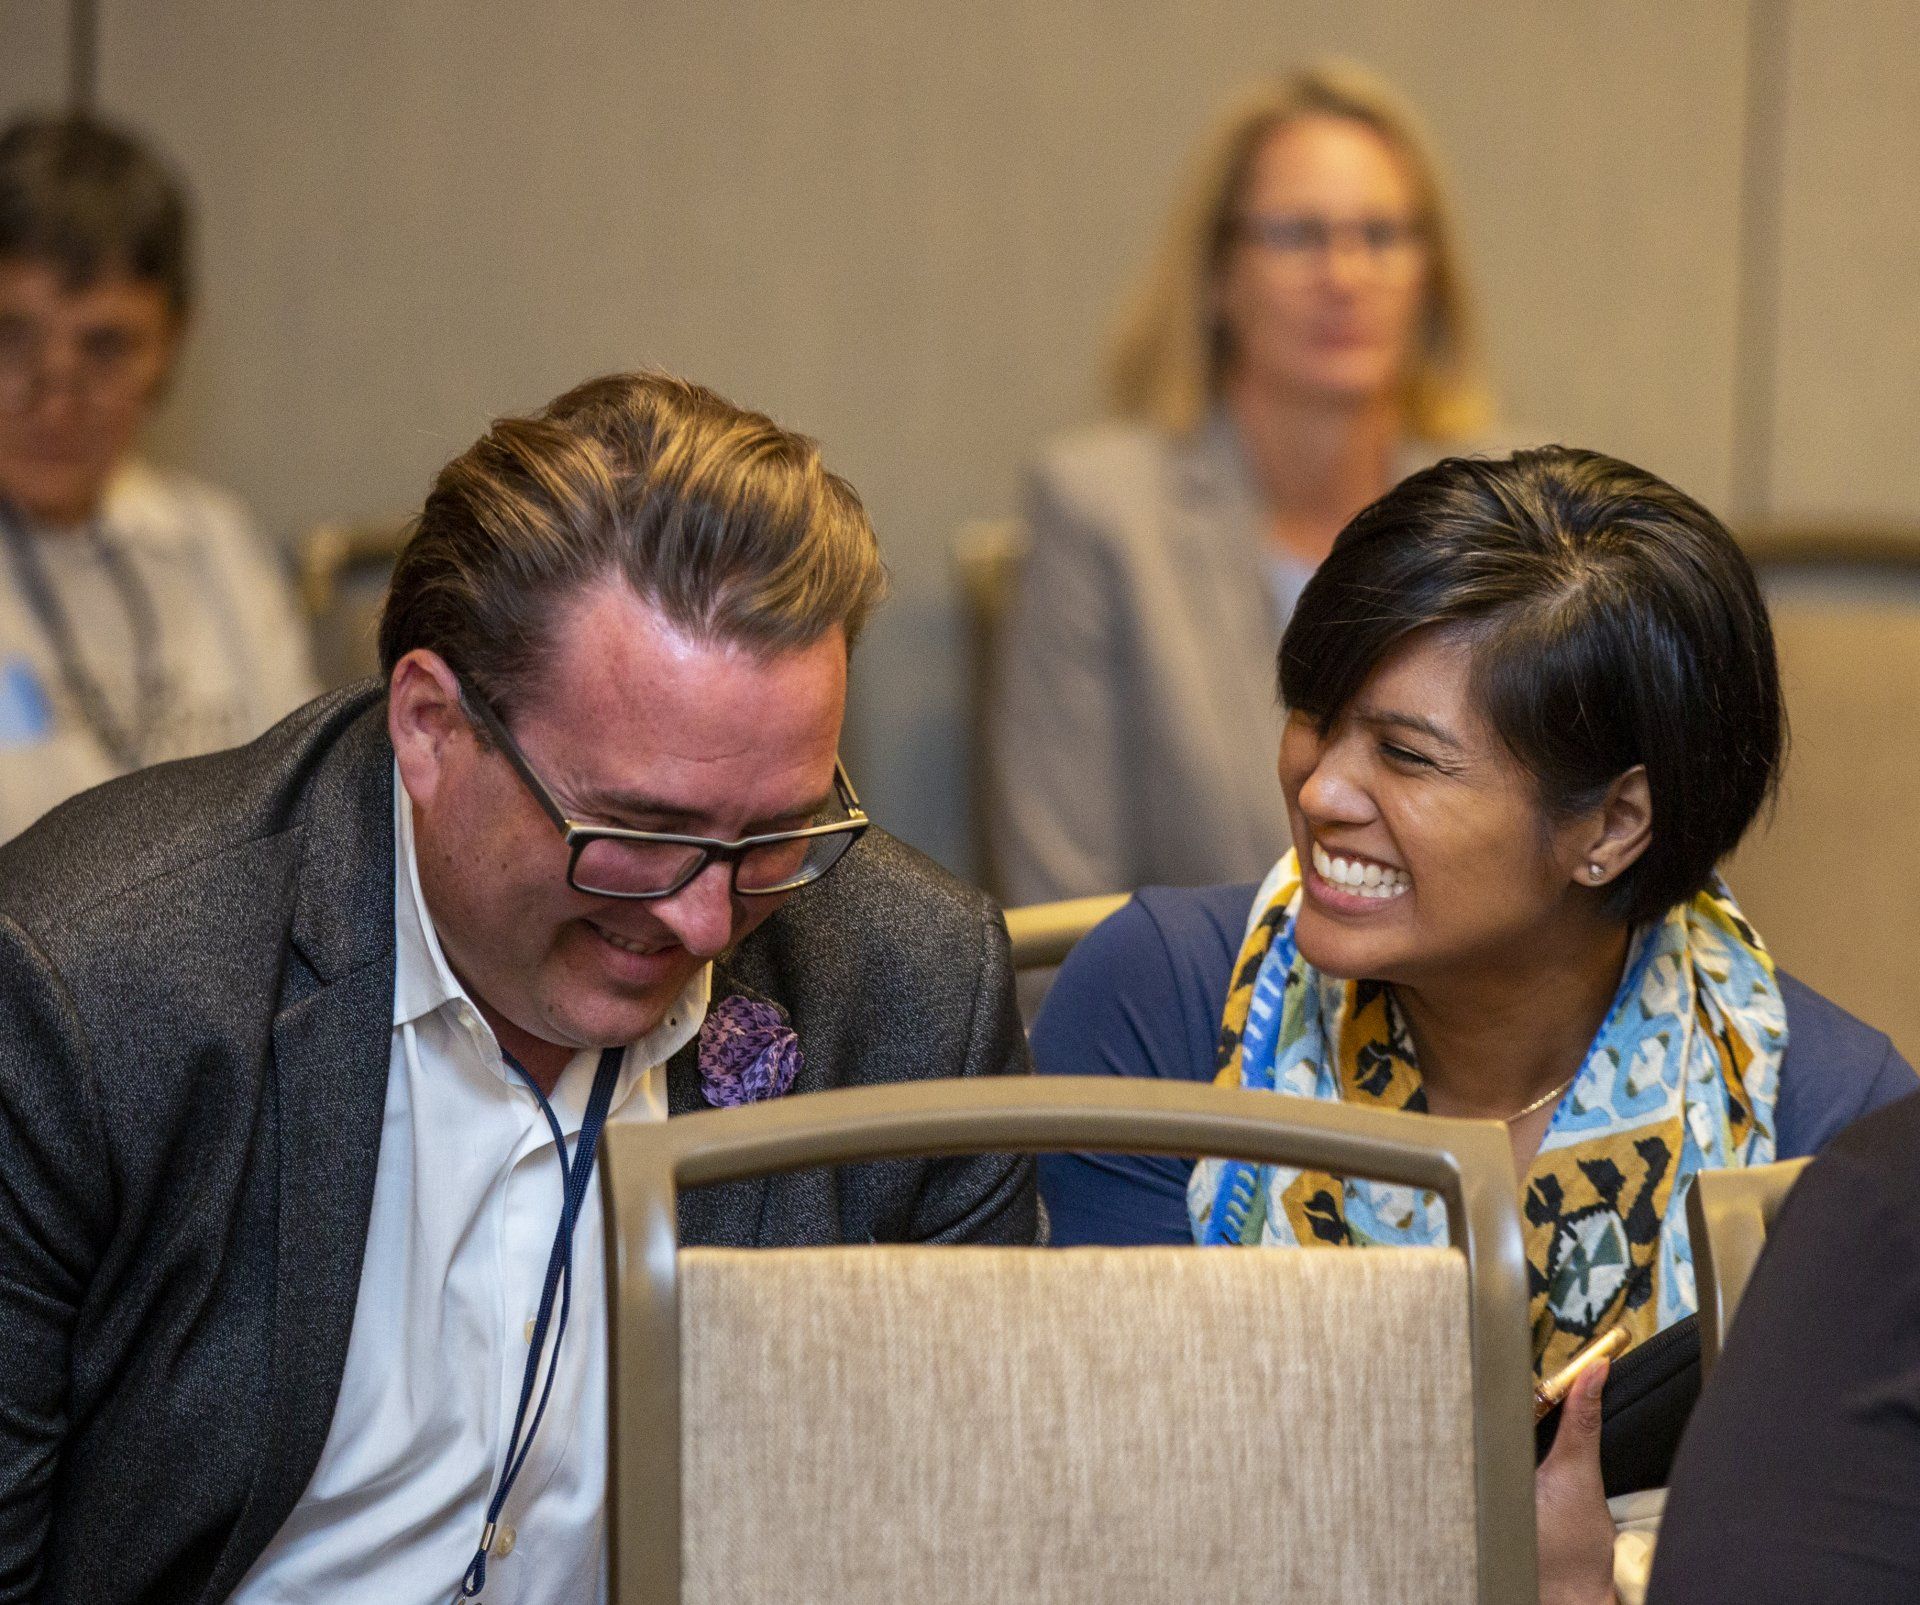 Two people laughing while at a conference.